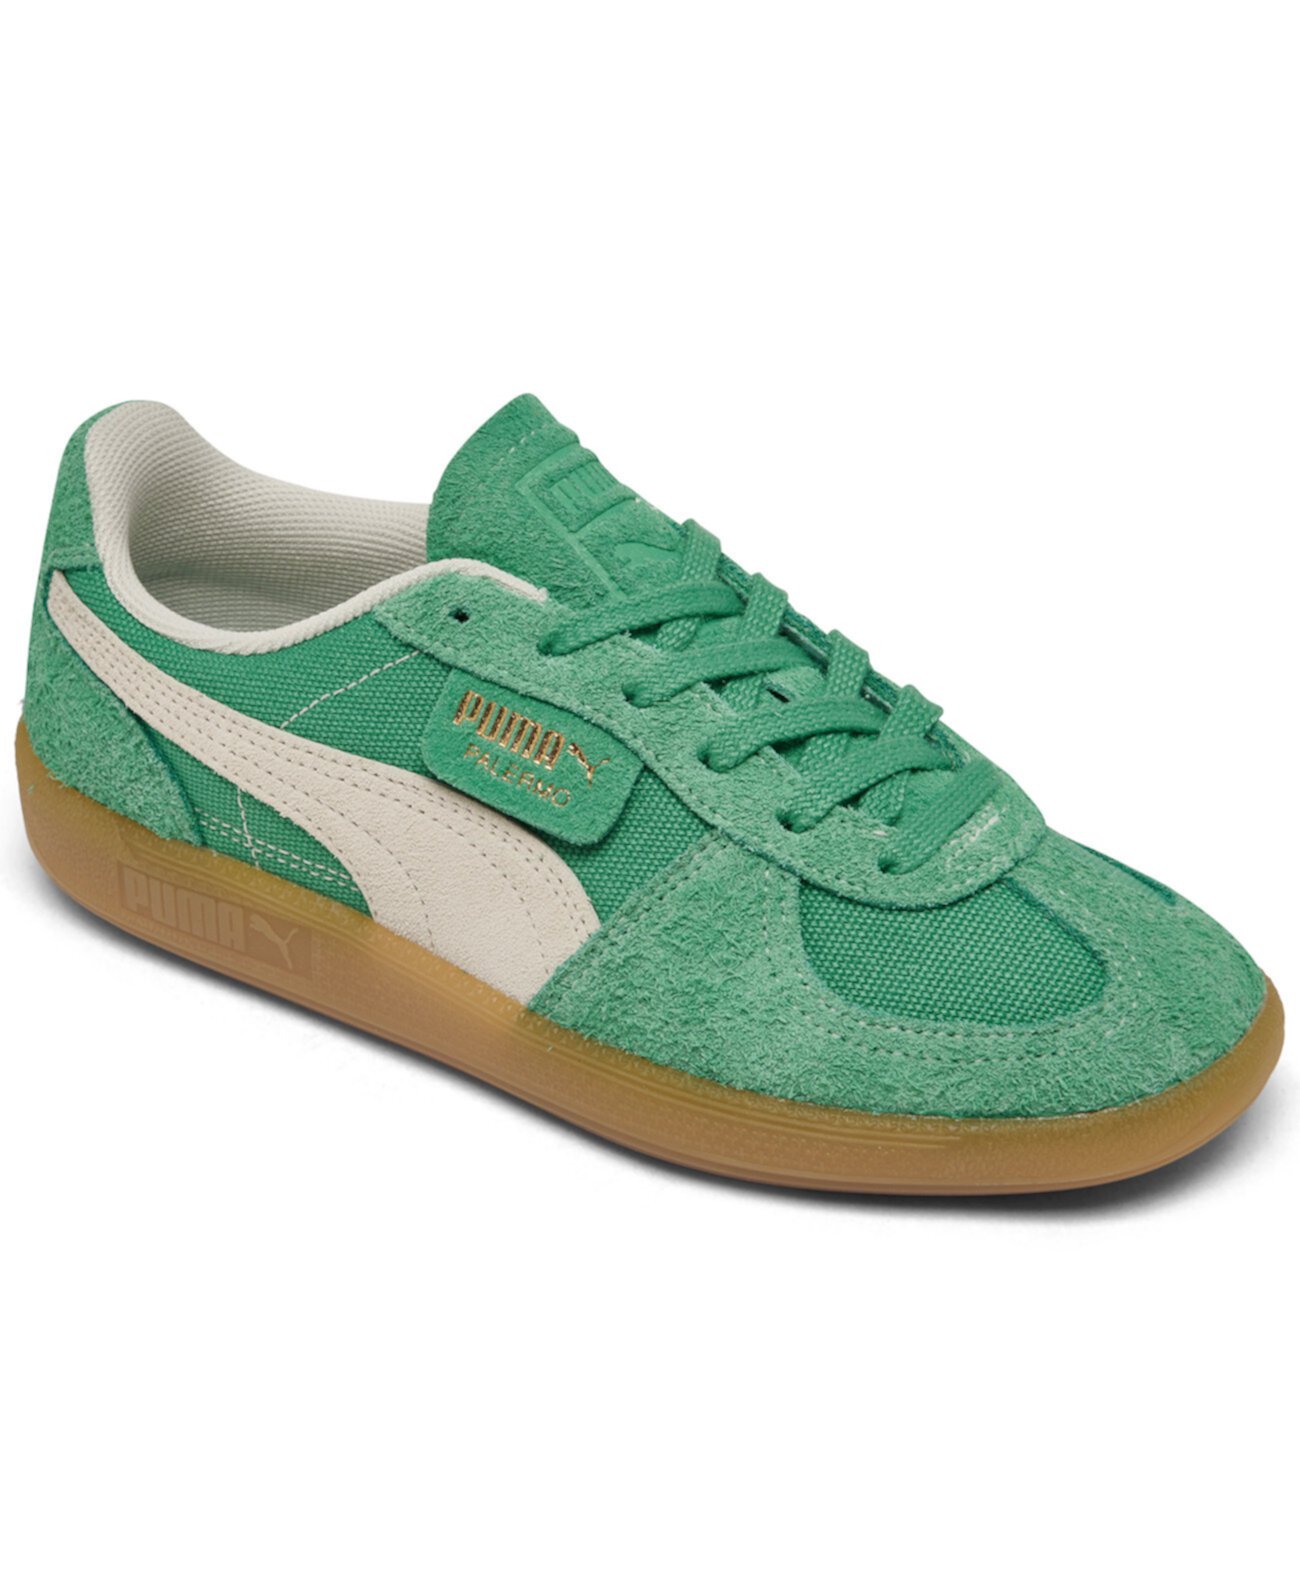 Women's Palermo vintage-like Casual Sneakers from Finish Line PUMA